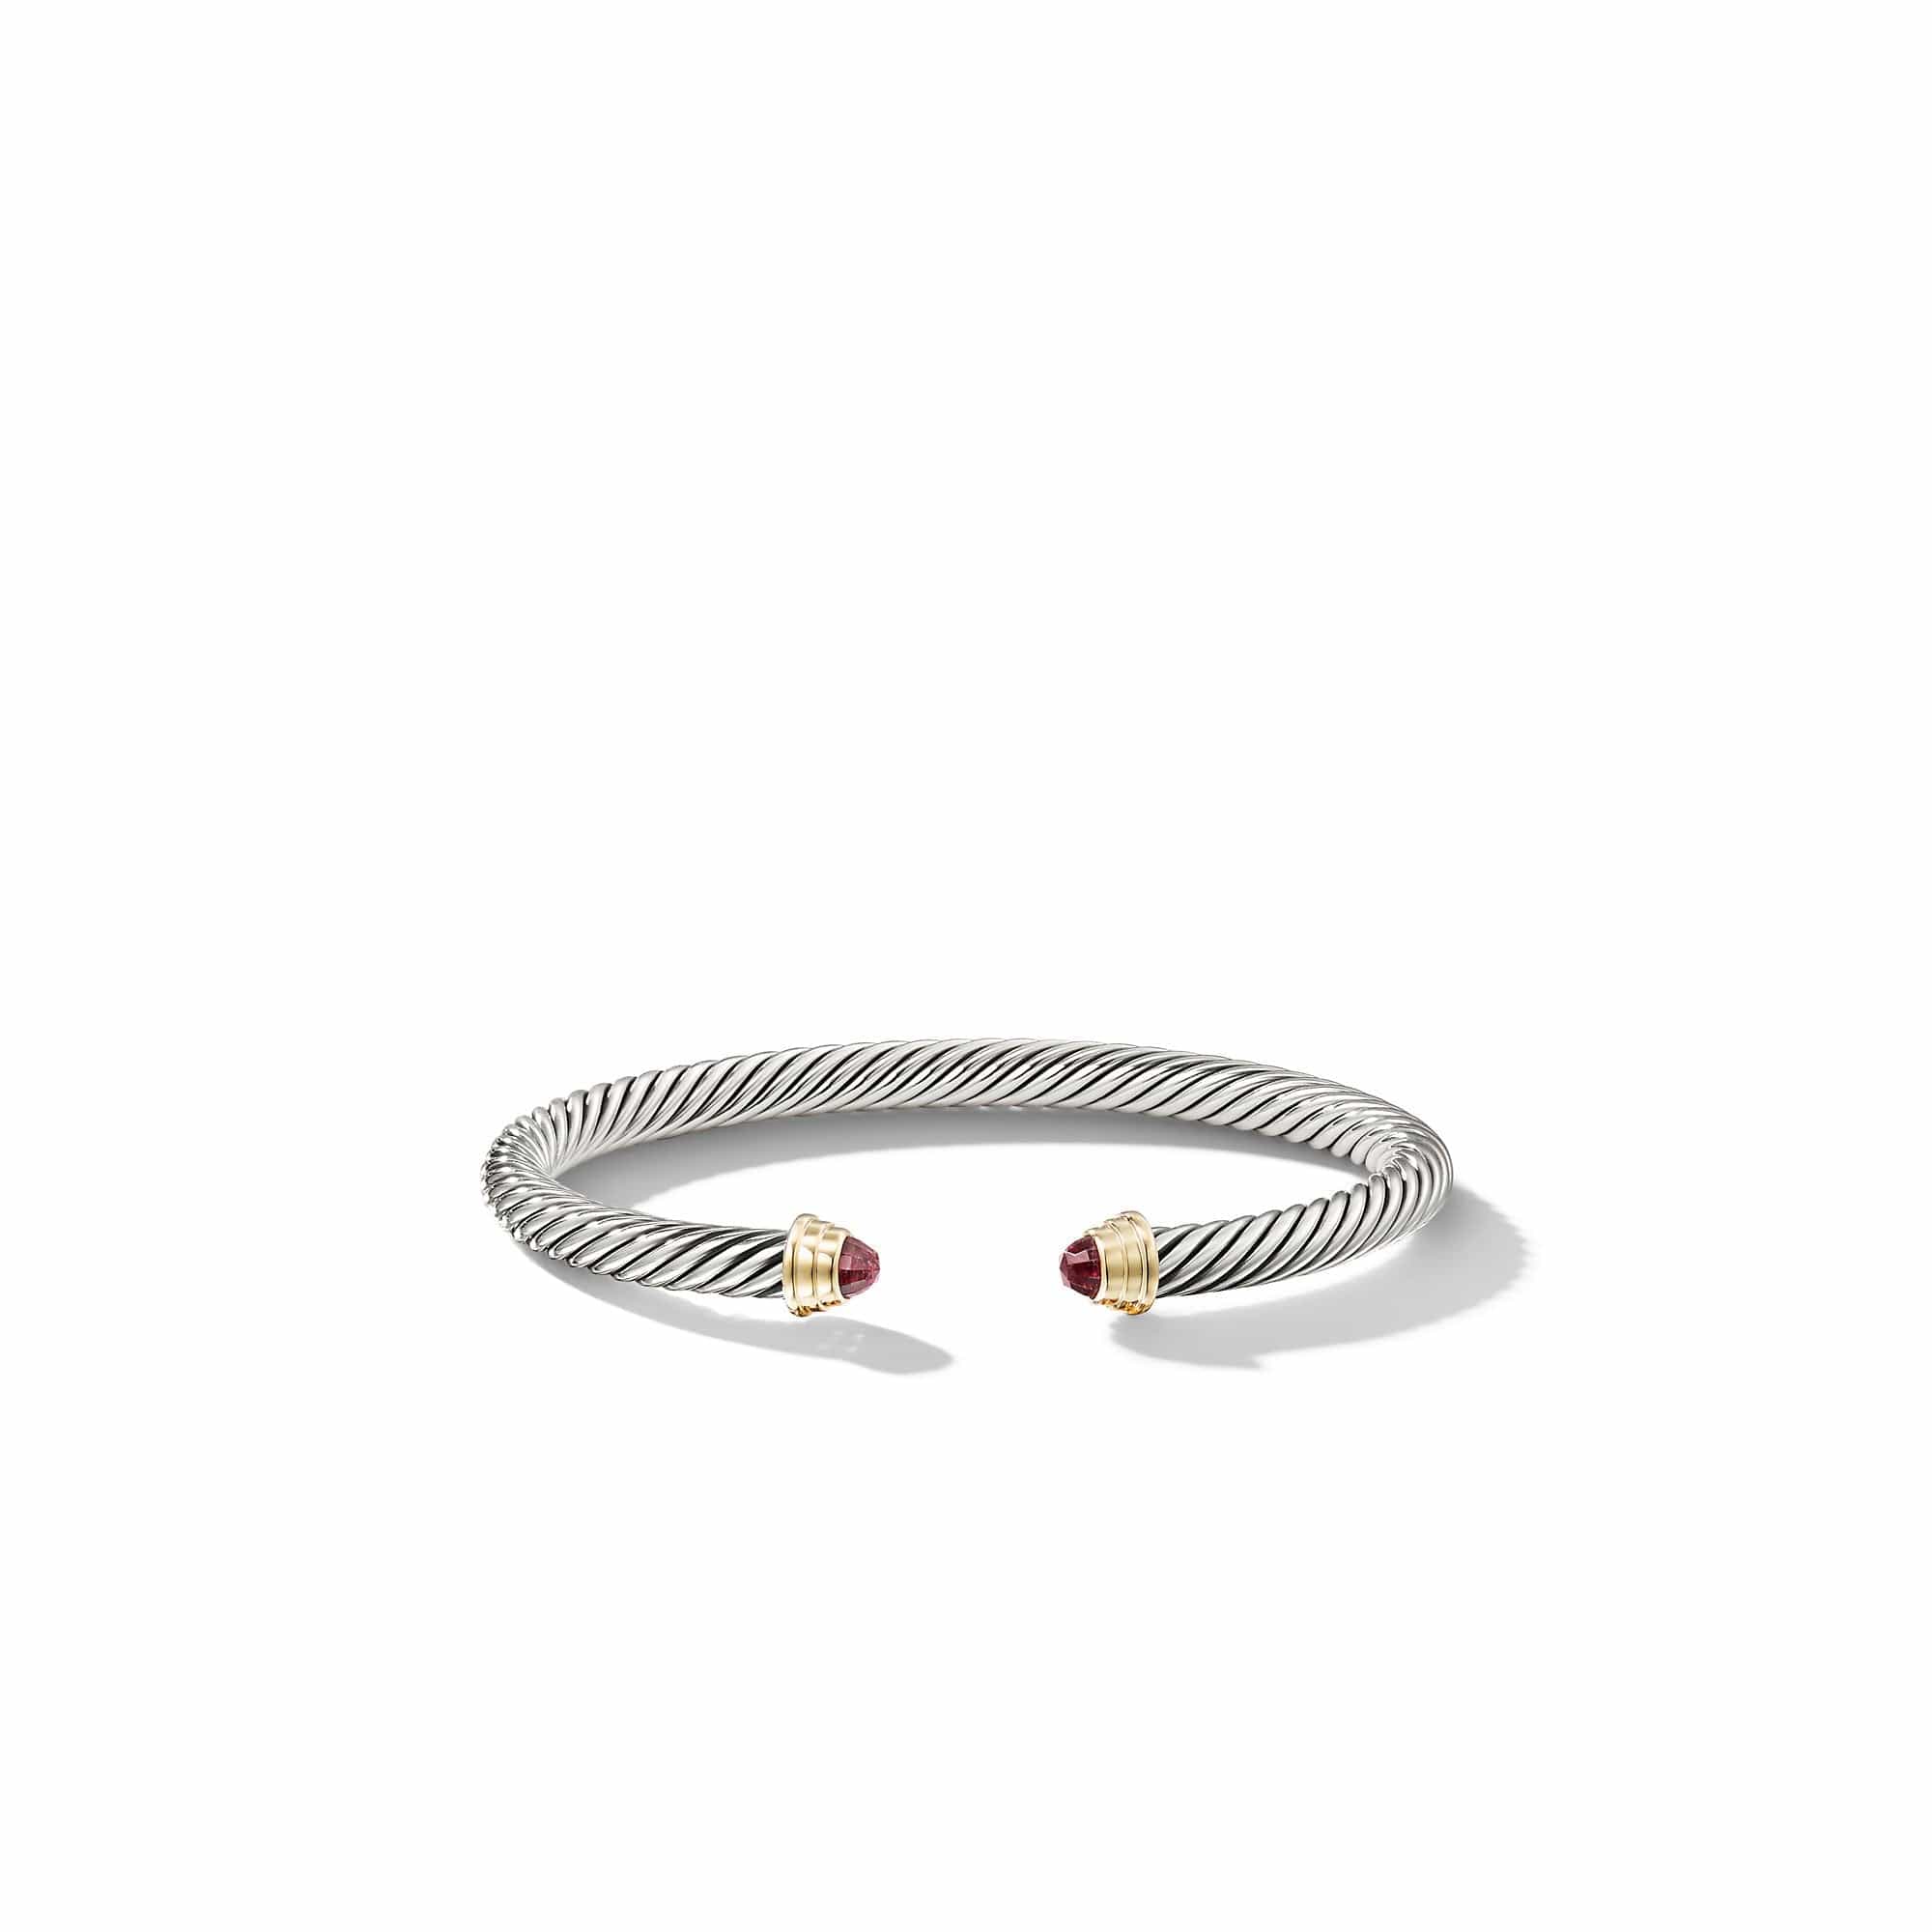 Cable Kids® Birthstone Bracelet with Pink Tourmaline and 14K Gold, 4mm